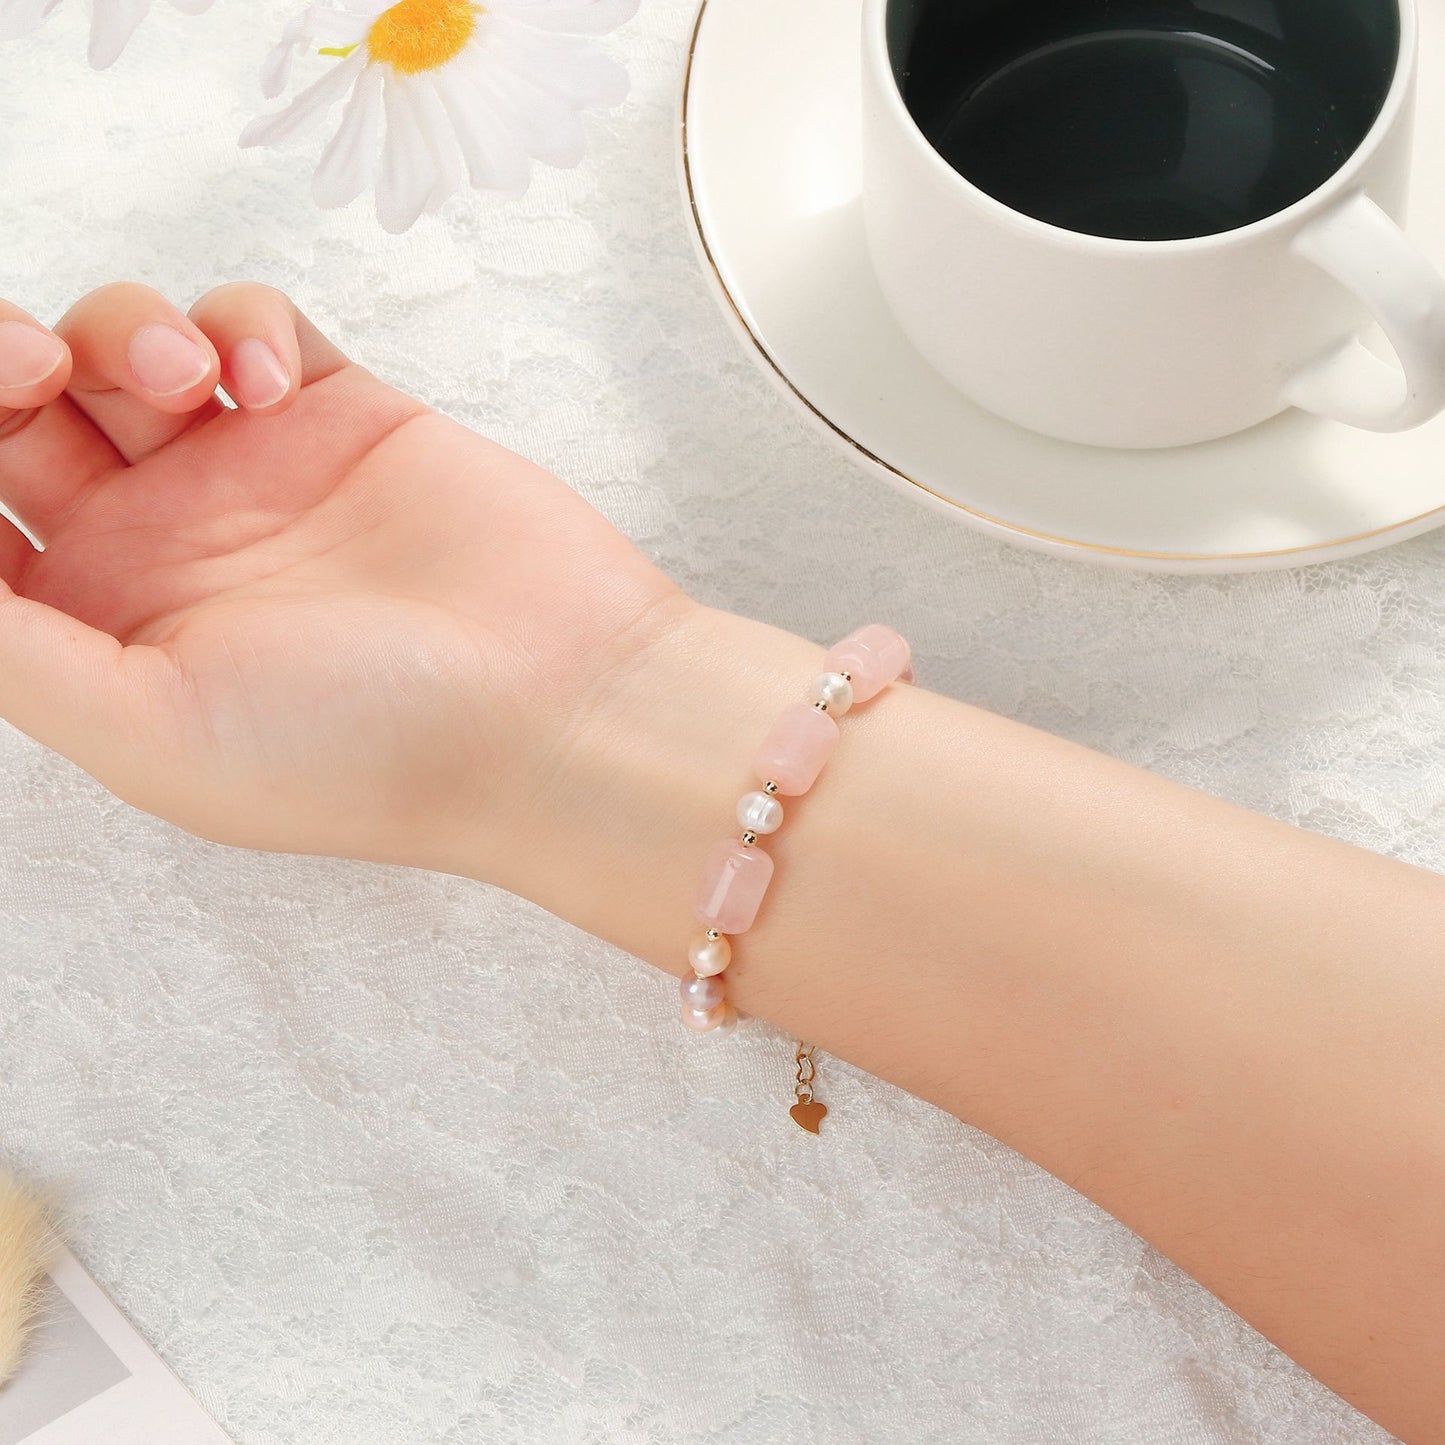 Peach Blossom Freshwater Pearl Bracelet with Gold Wrapped Crystal Barrel